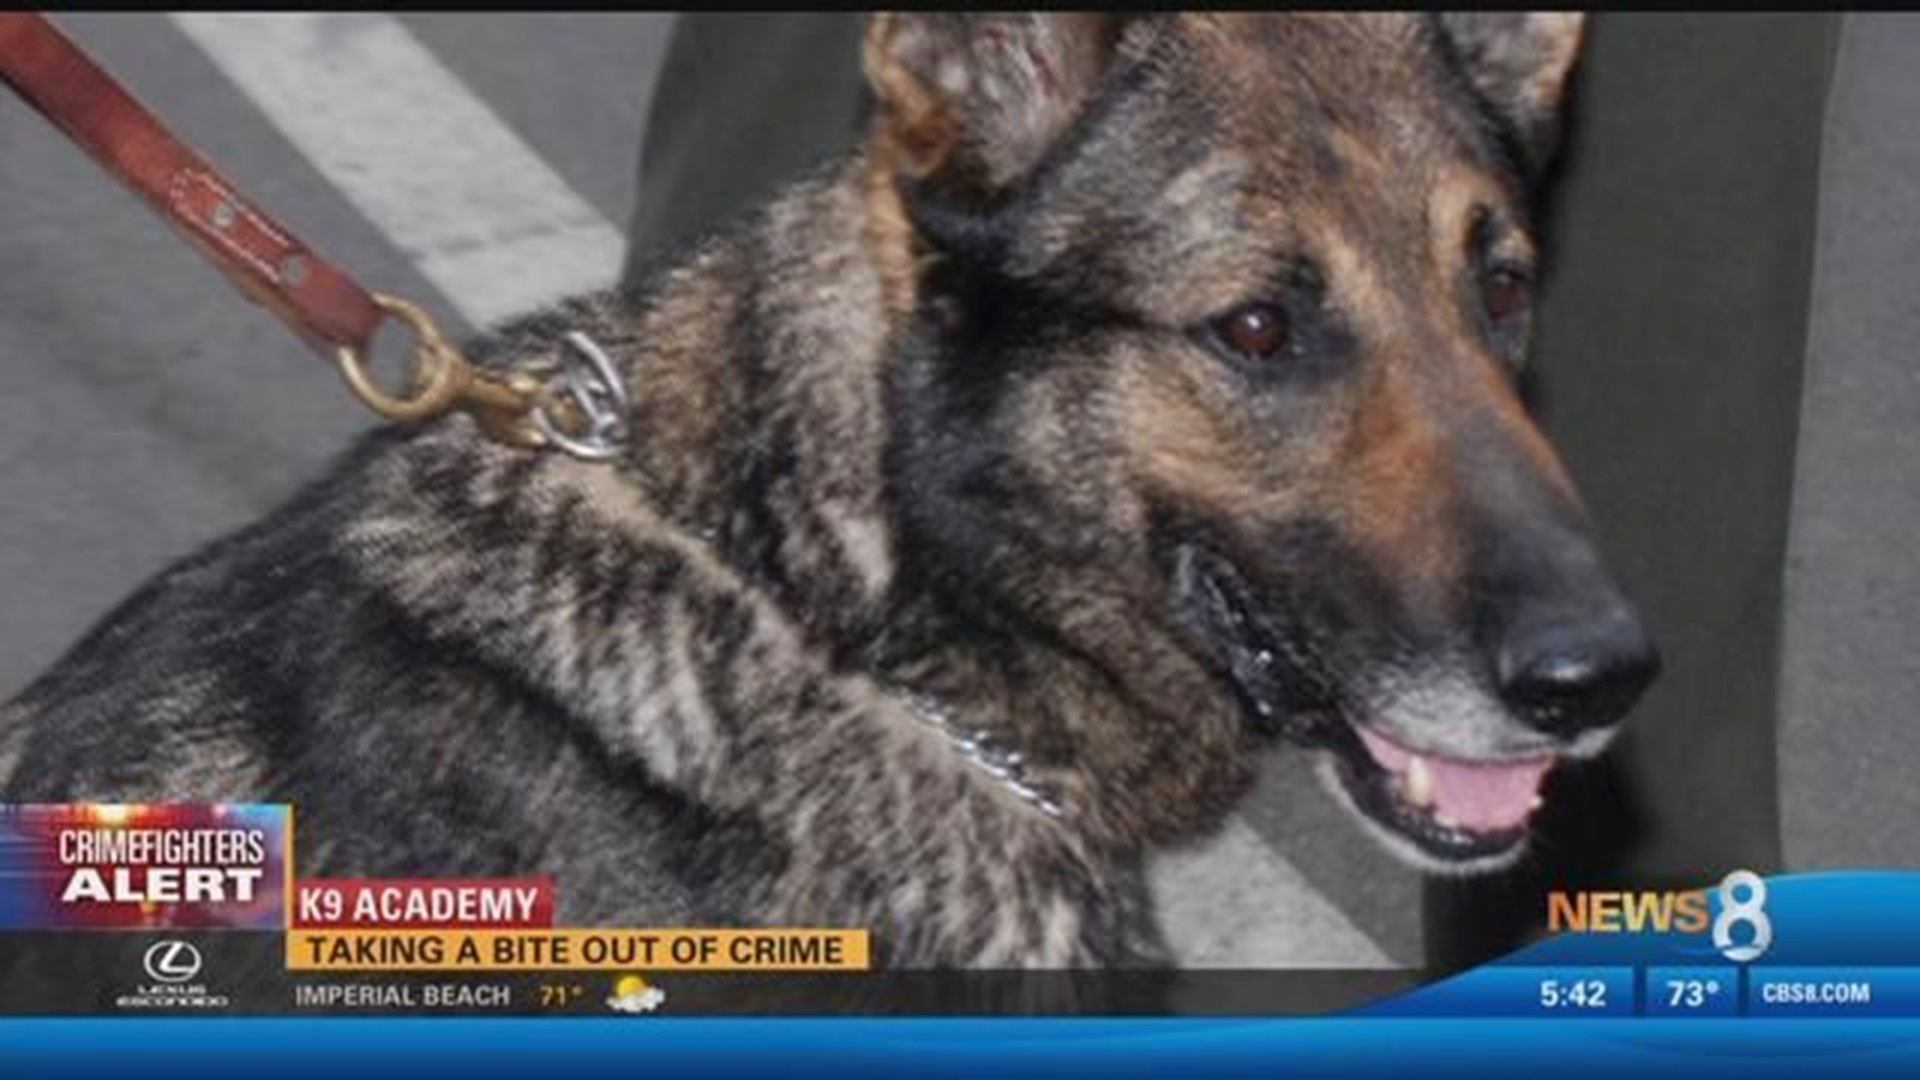 San Diego Sheriff's K-9 Academy: Taking a bite out of crime | cbs8.com